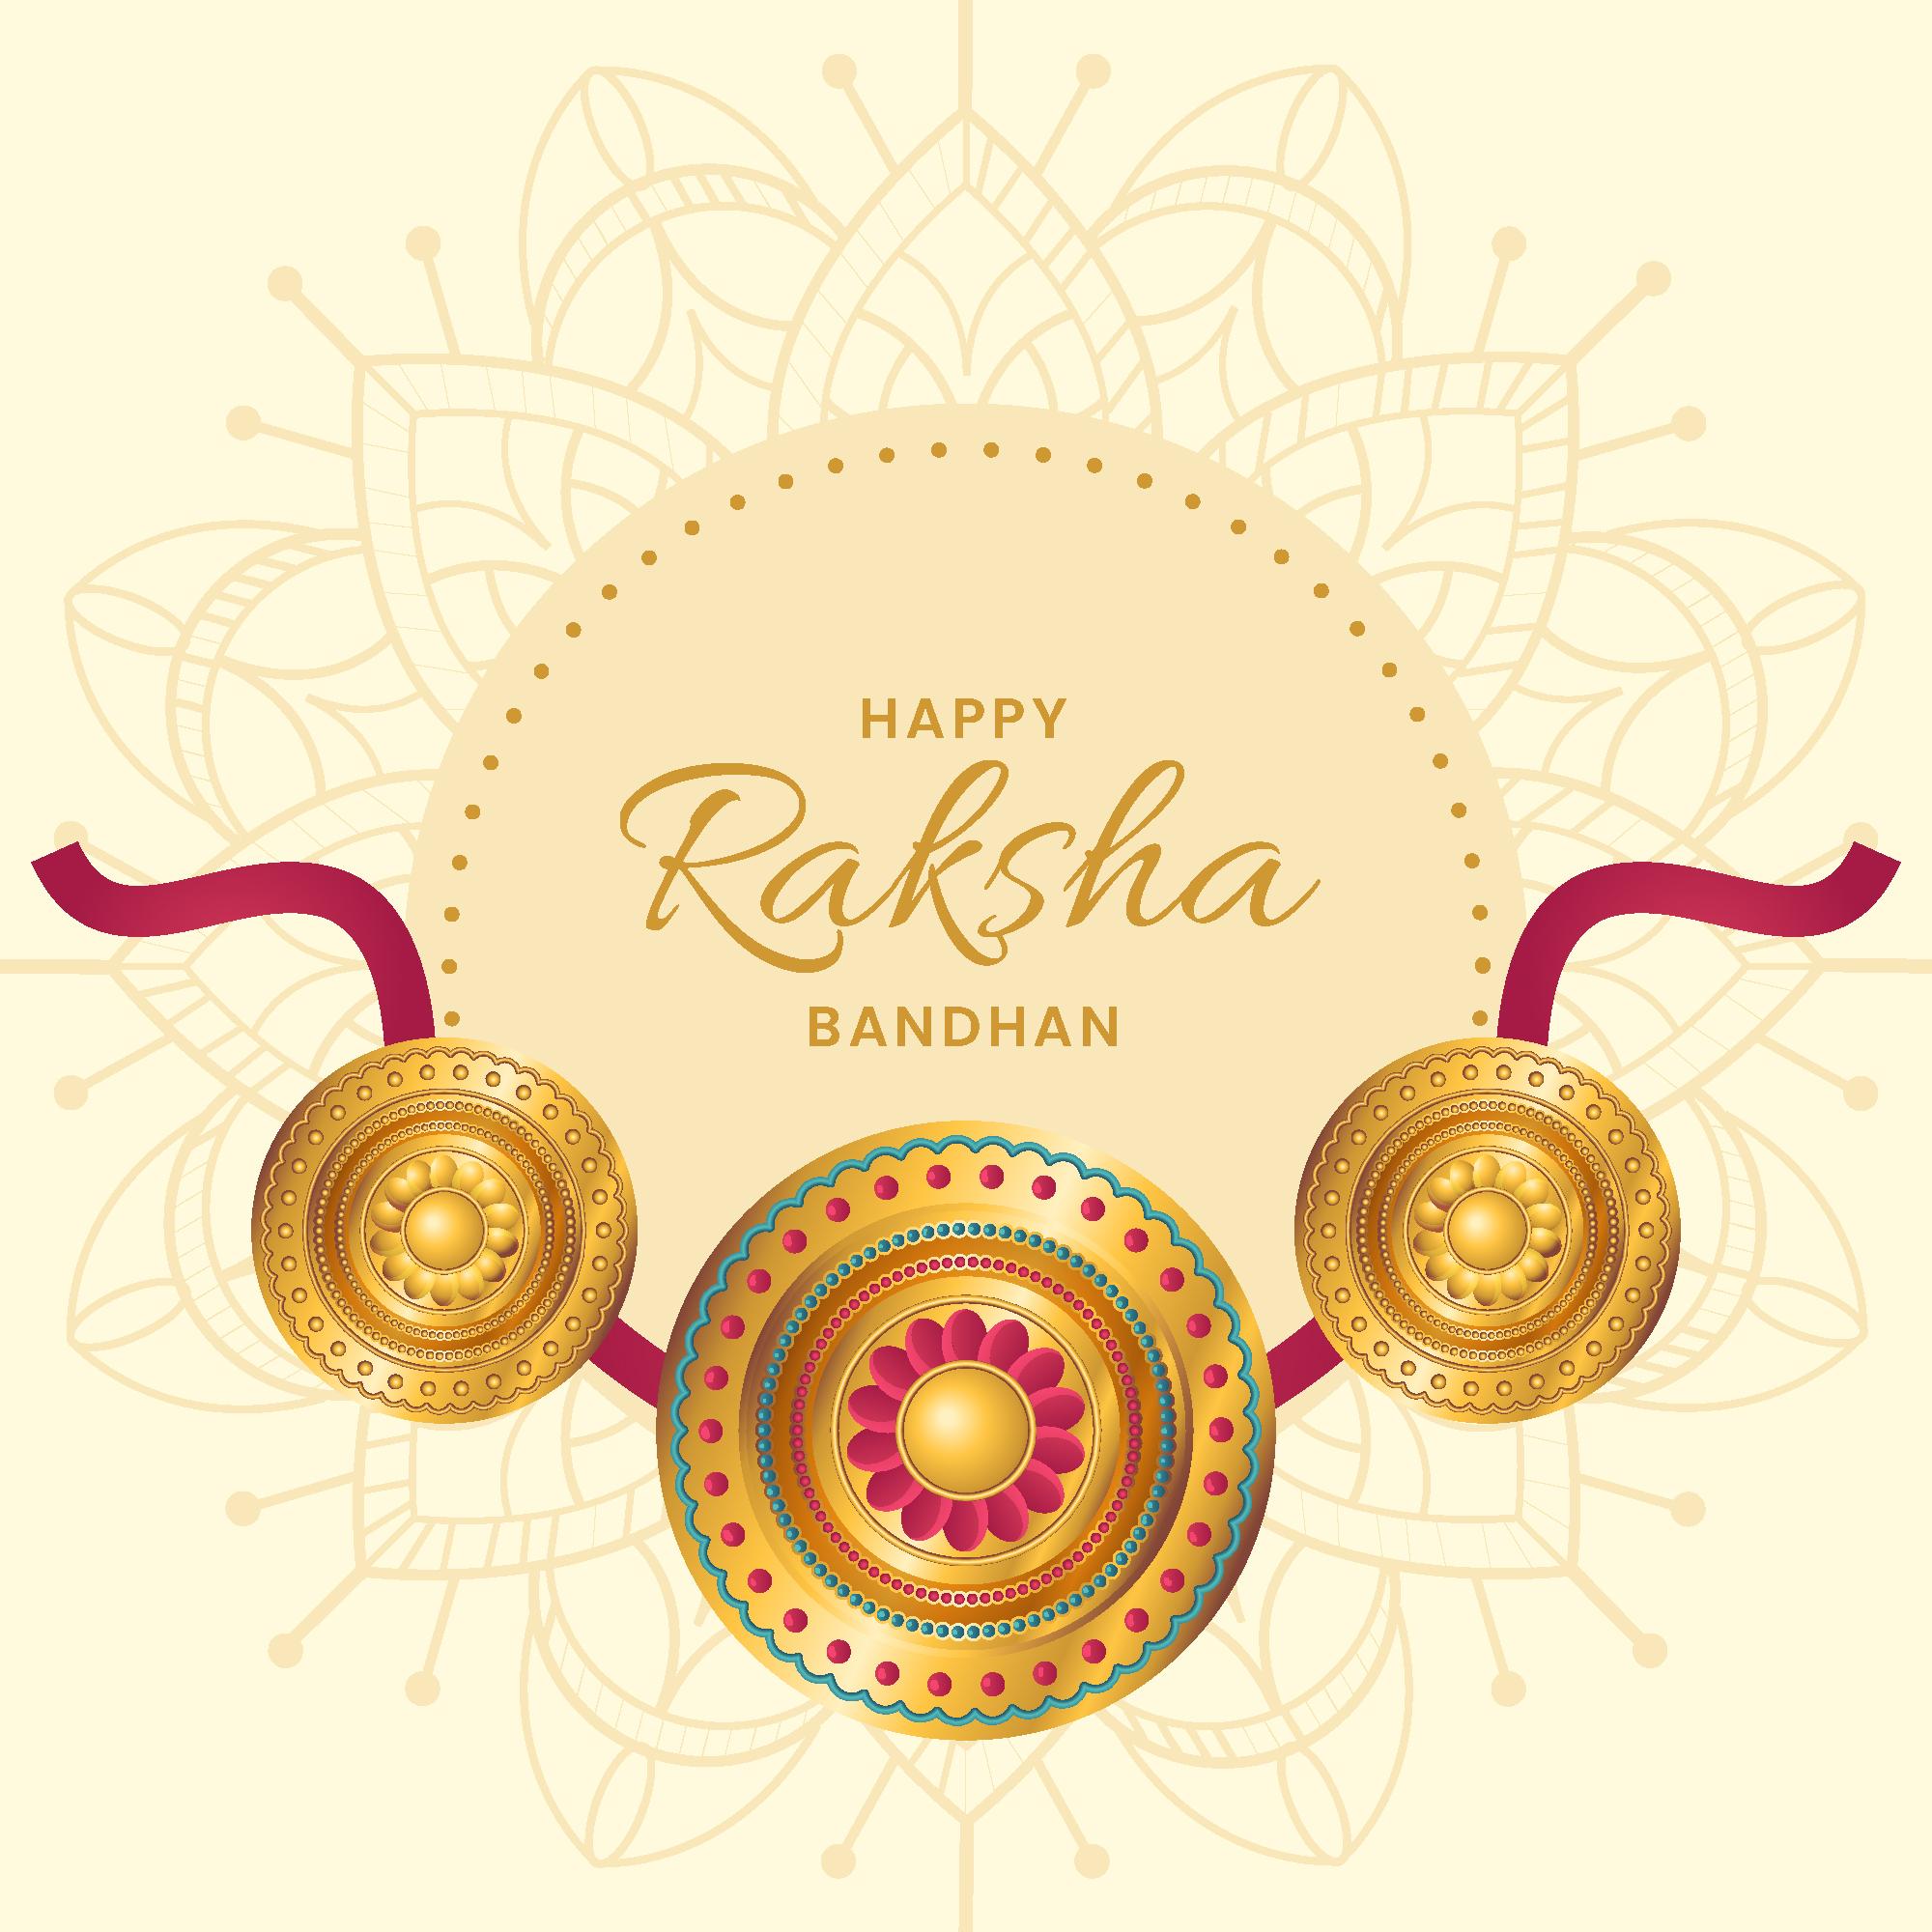 Top Designs for Traditional Rakhi in 2021